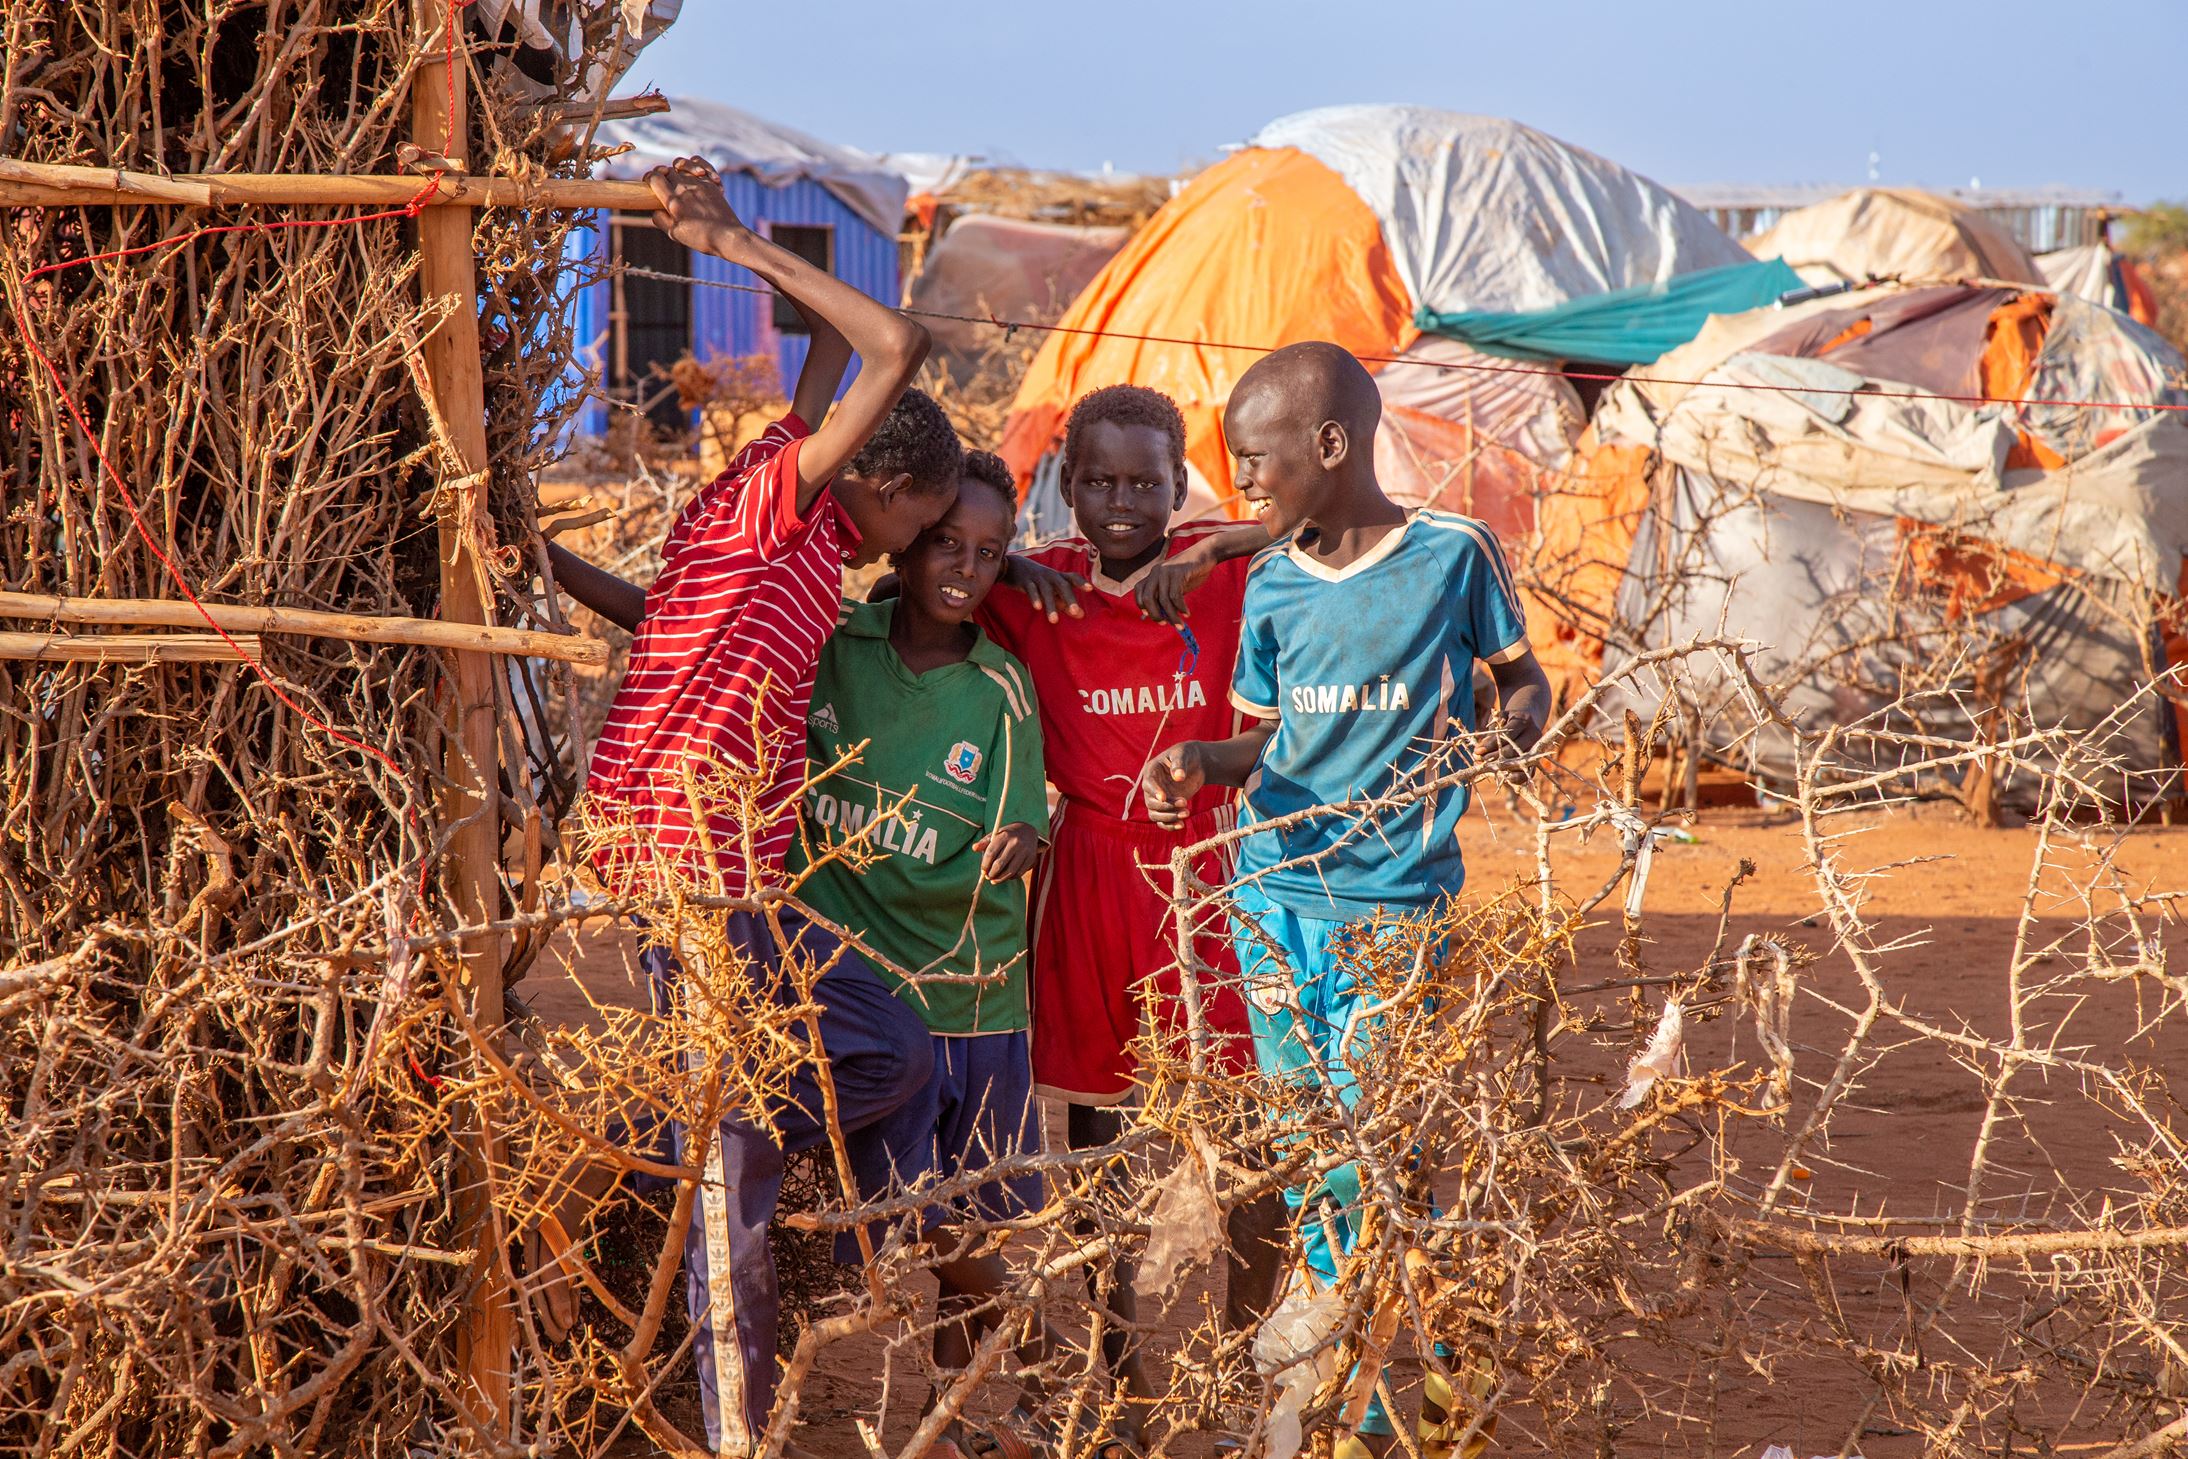 Group of boys playing outside in displacement camp, Dollow, Somalia